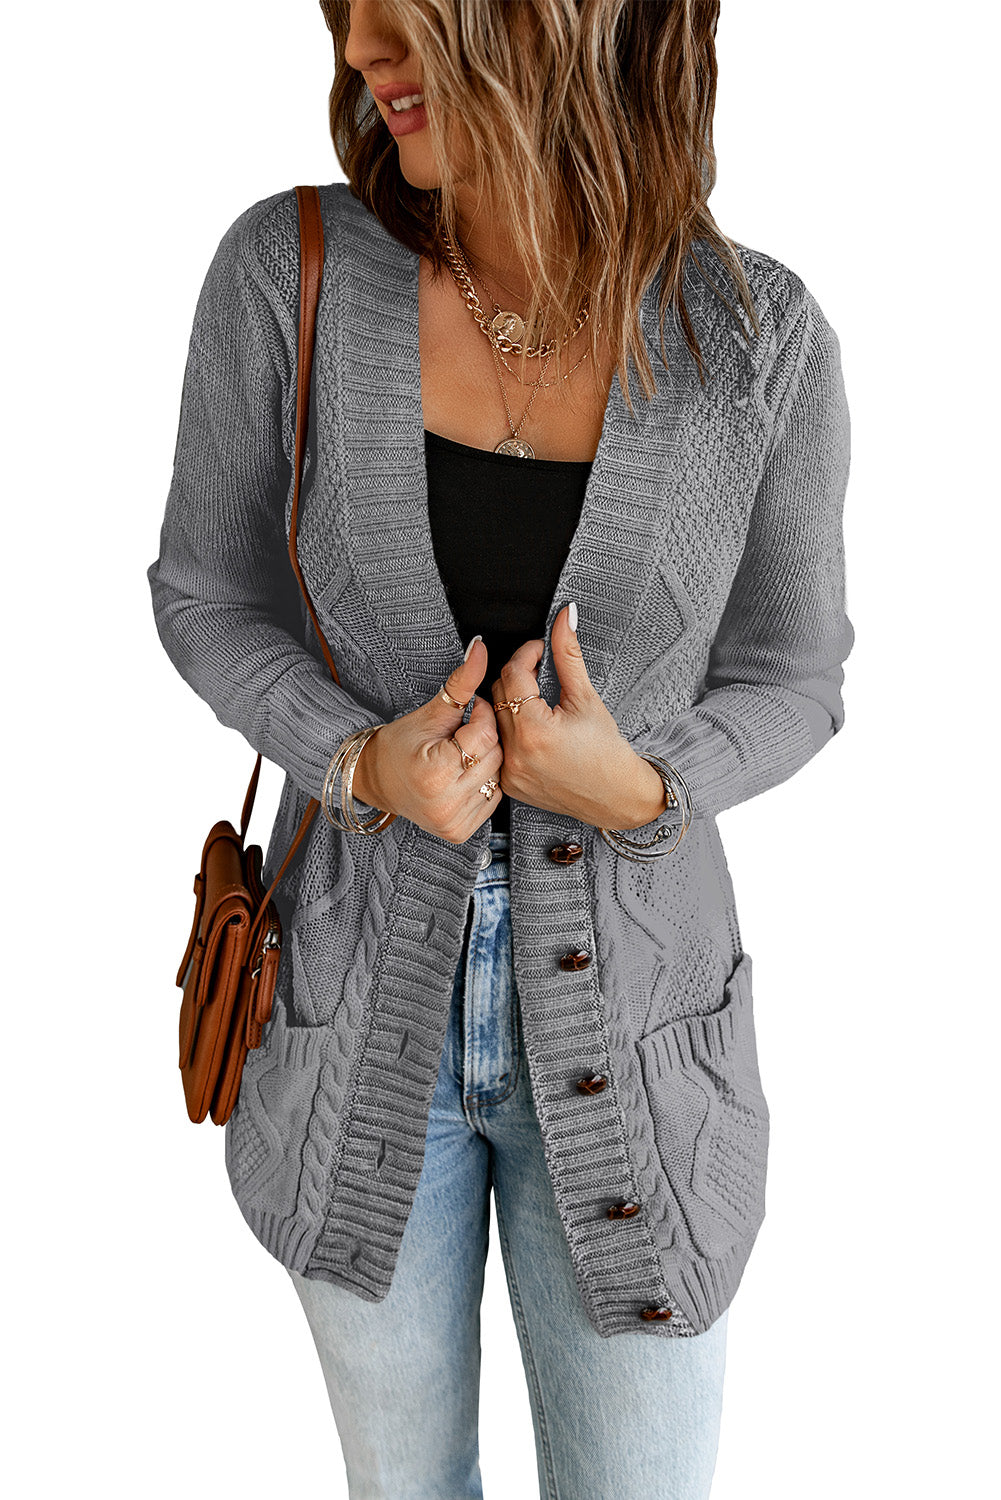 Dark Gray Front Pocket and Buttons Closure Cardigan Sweaters & Cardigans JT's Designer Fashion